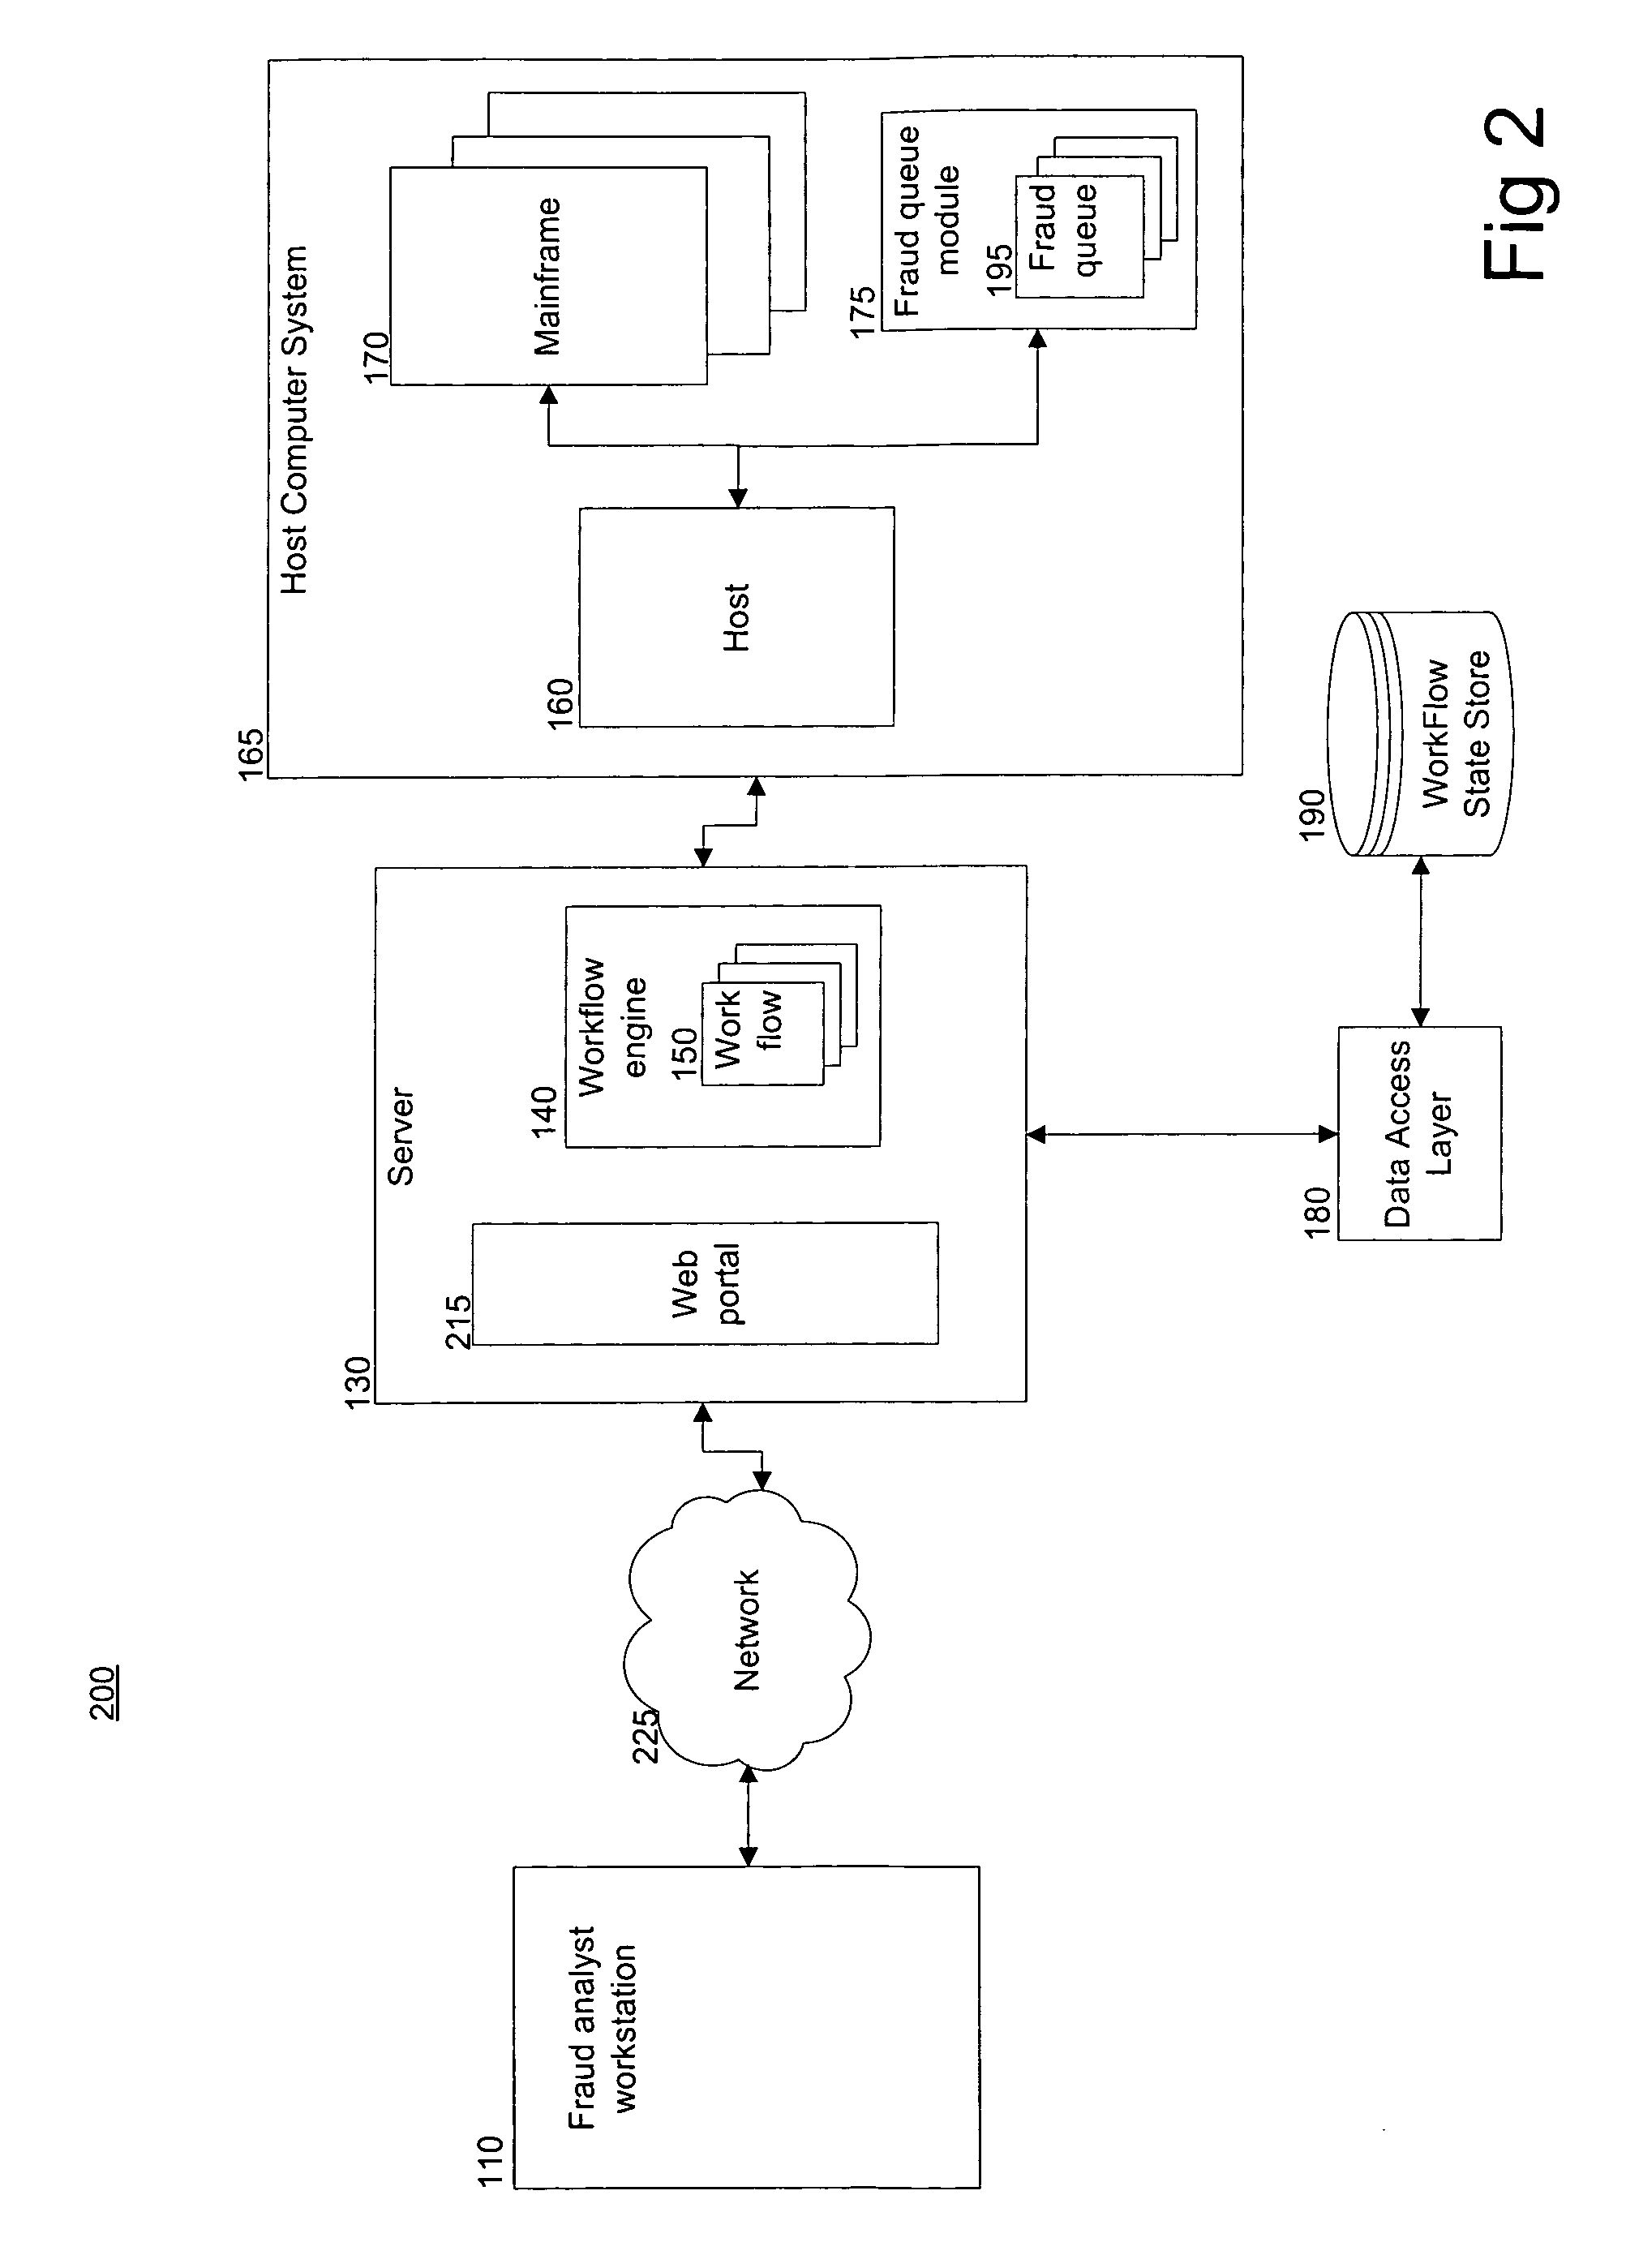 Method and system for detecting fraud in financial transactions